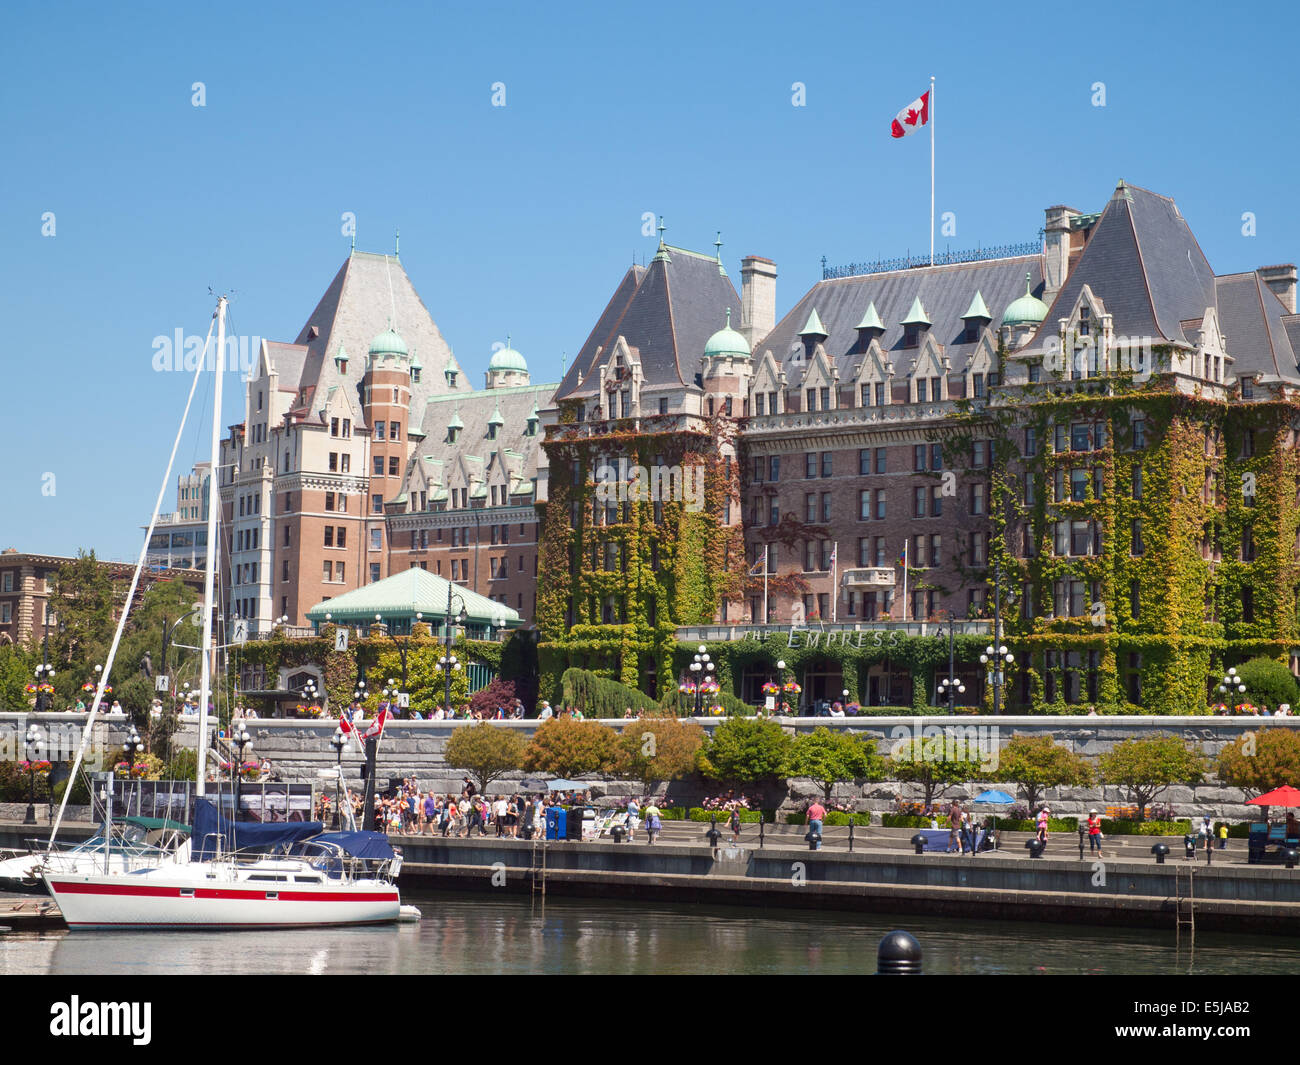 A view of the Inner Harbour and Fairmont Empress Hotel in Victoria, British Columbia, Canada. Stock Photo